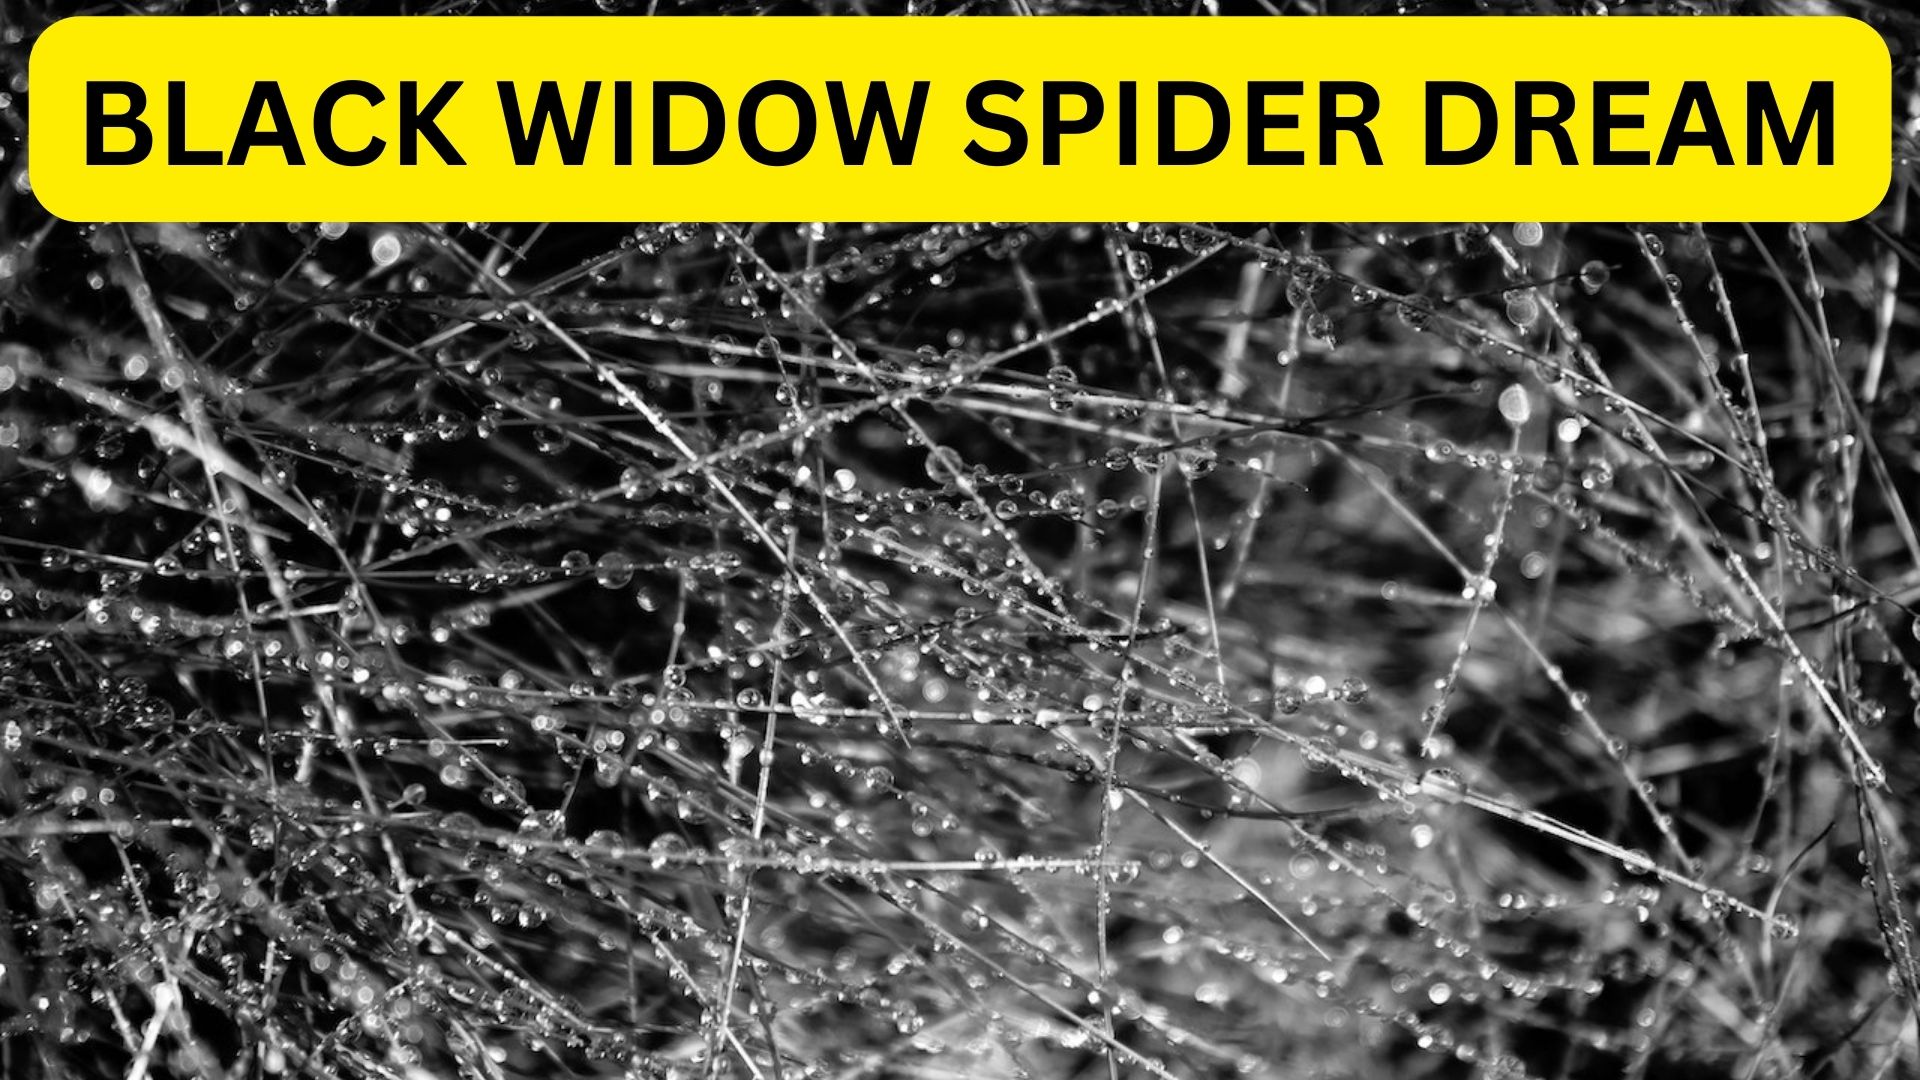 Black Widow Spider Dream - It Represents Unresolved Relationship Issues